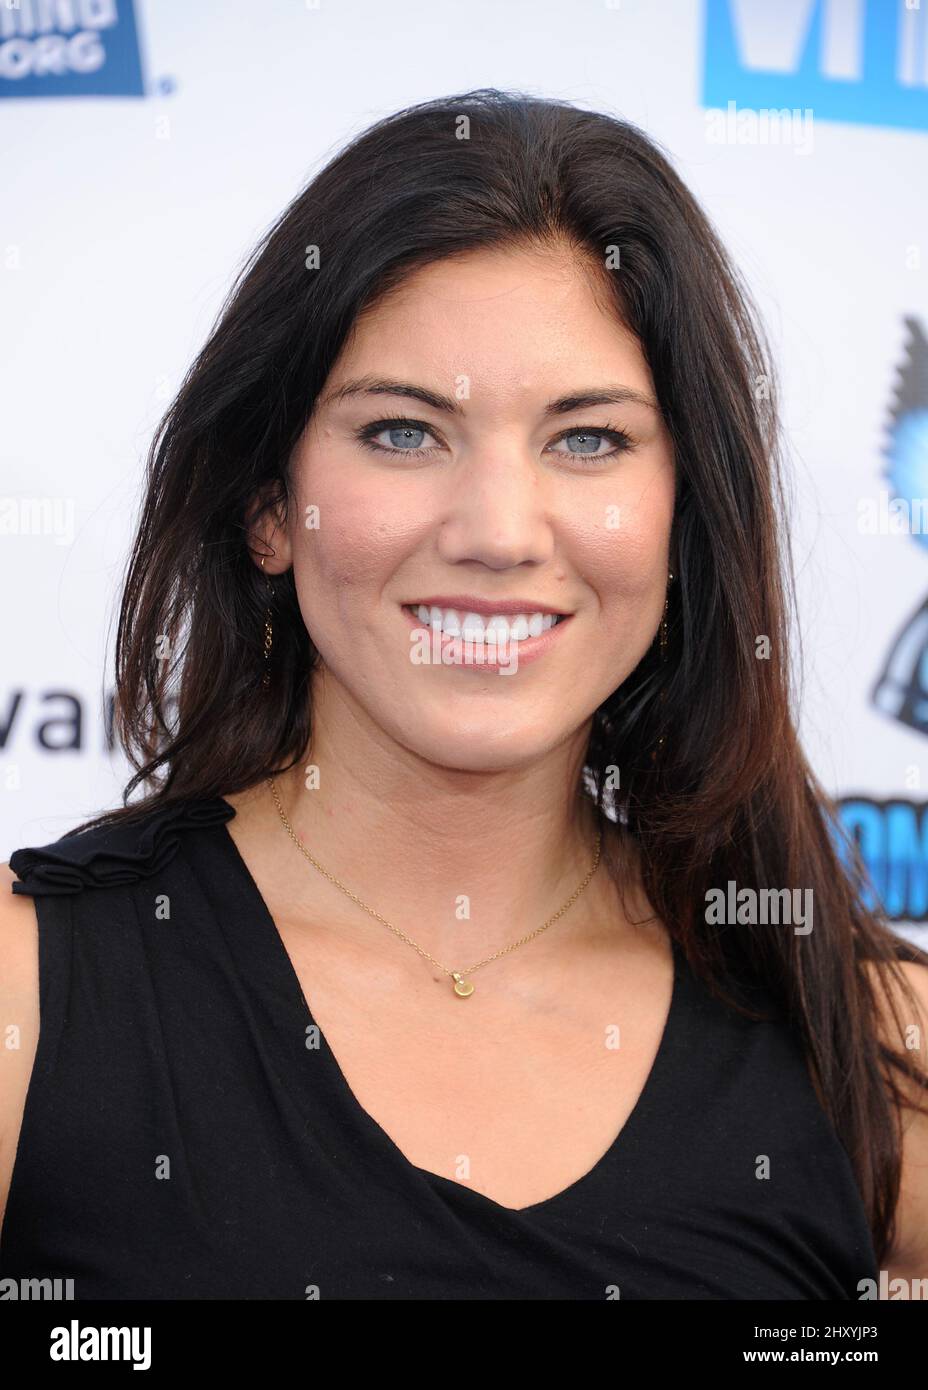 Hope Solo attends 2012 Do Something Awards presented by VH1 and DoSomething.org held at Barker Hanger, Santa Monica. Stock Photo